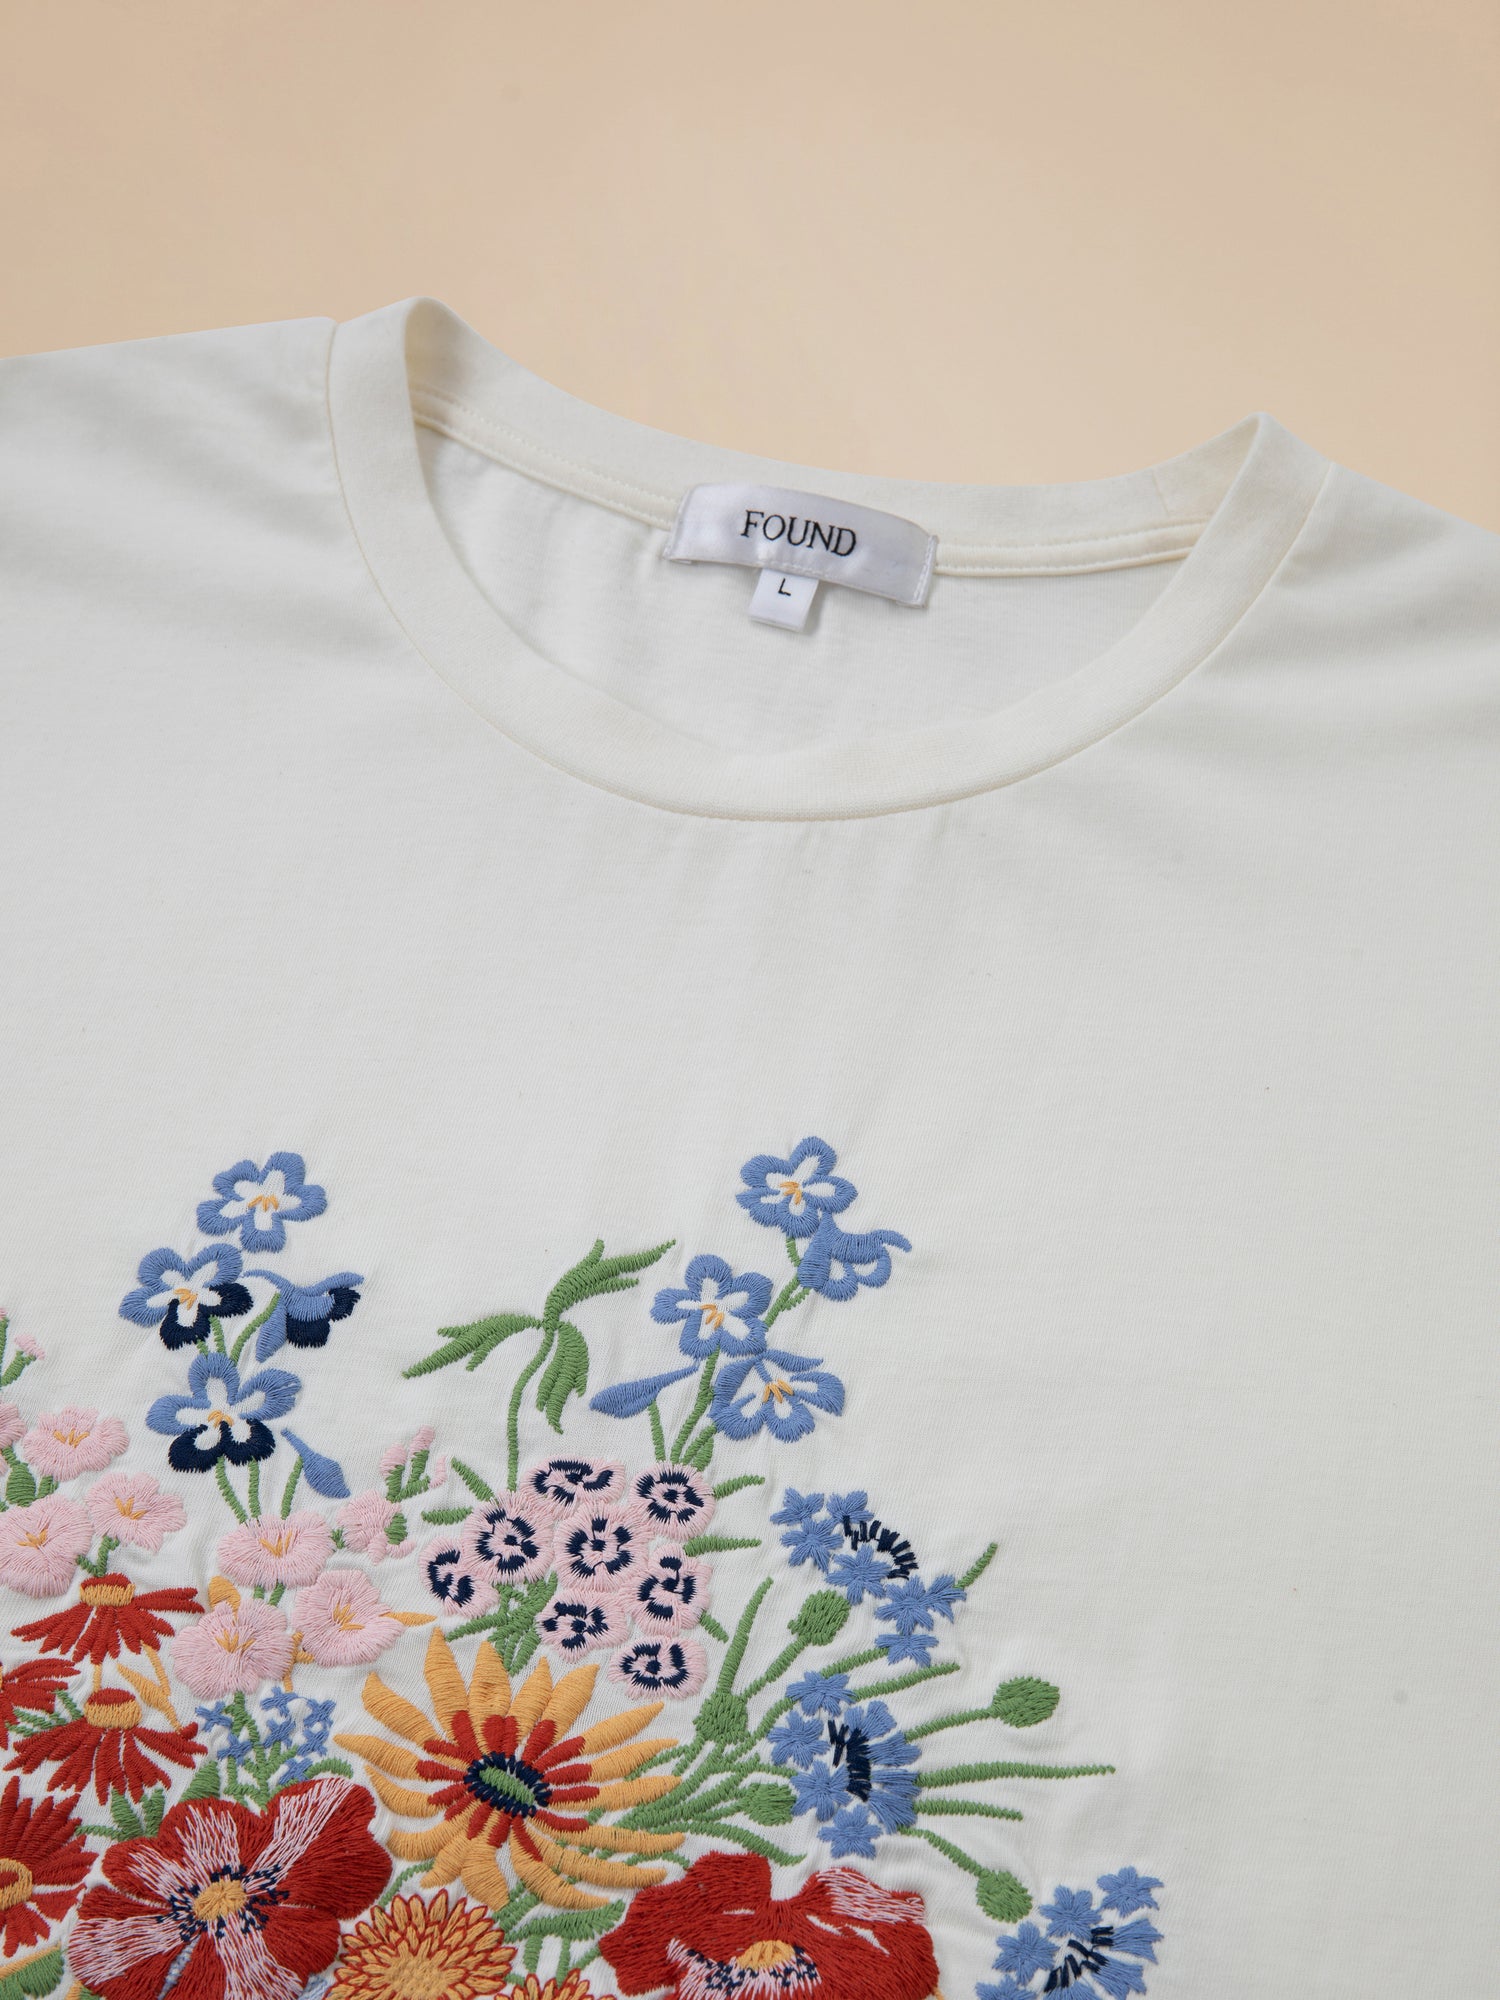 A white Bouquet Flowers Tee by Found with embroidered flowers on it.